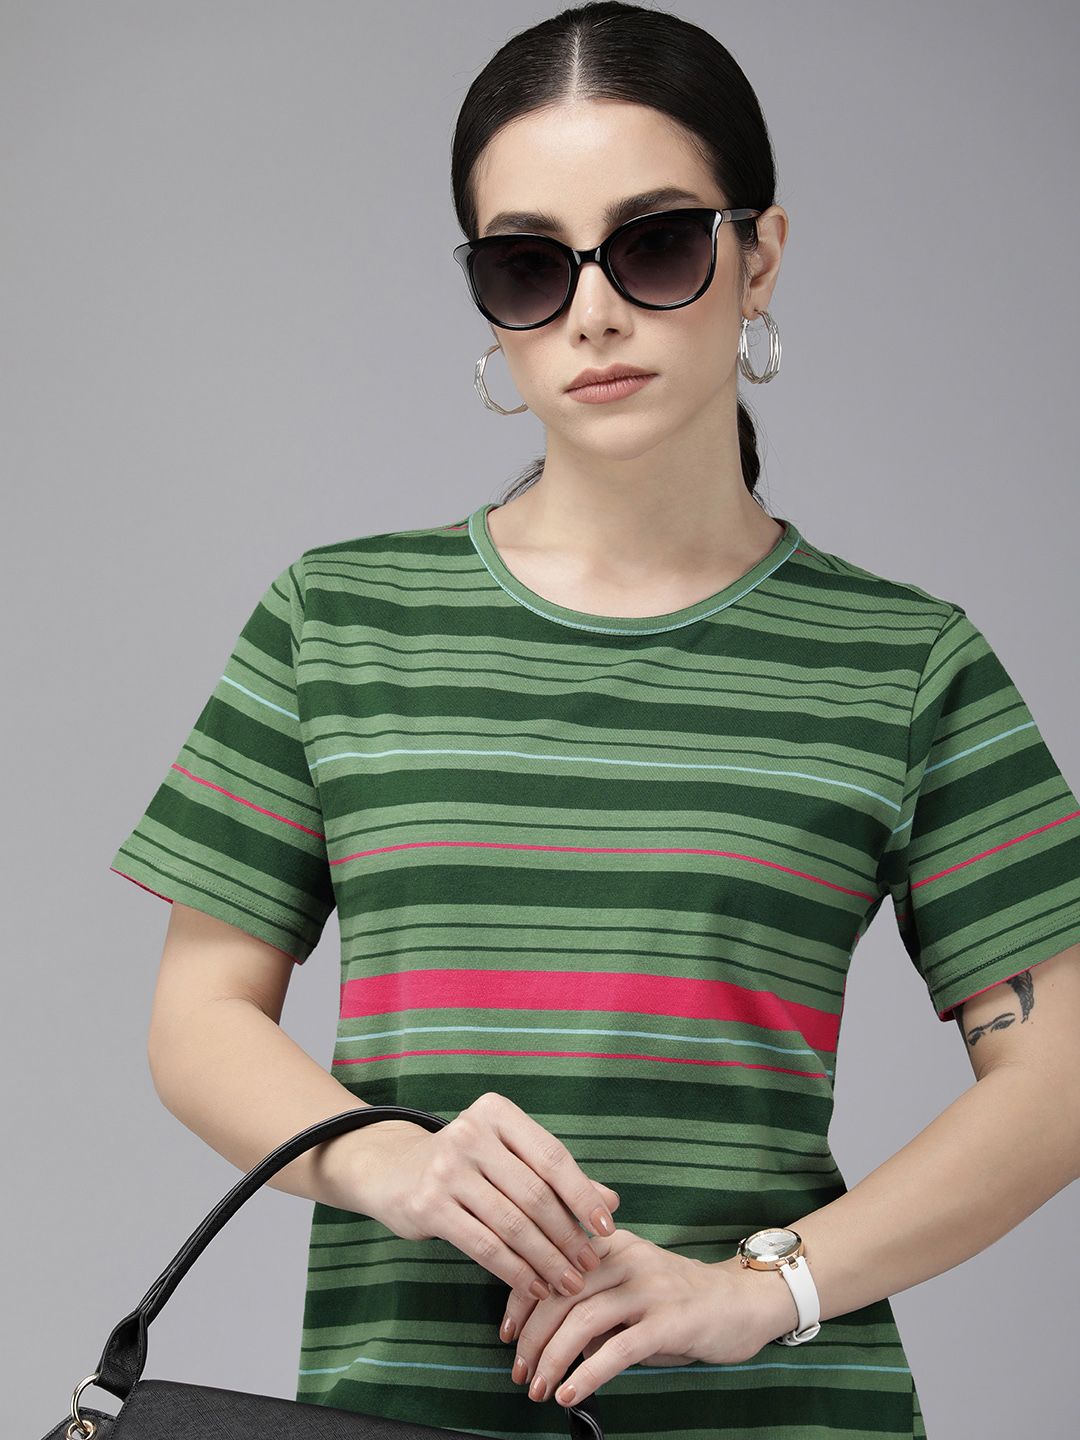 Van Heusen Woman Round Neck Striped Pure Cotton T-shirt Price in India